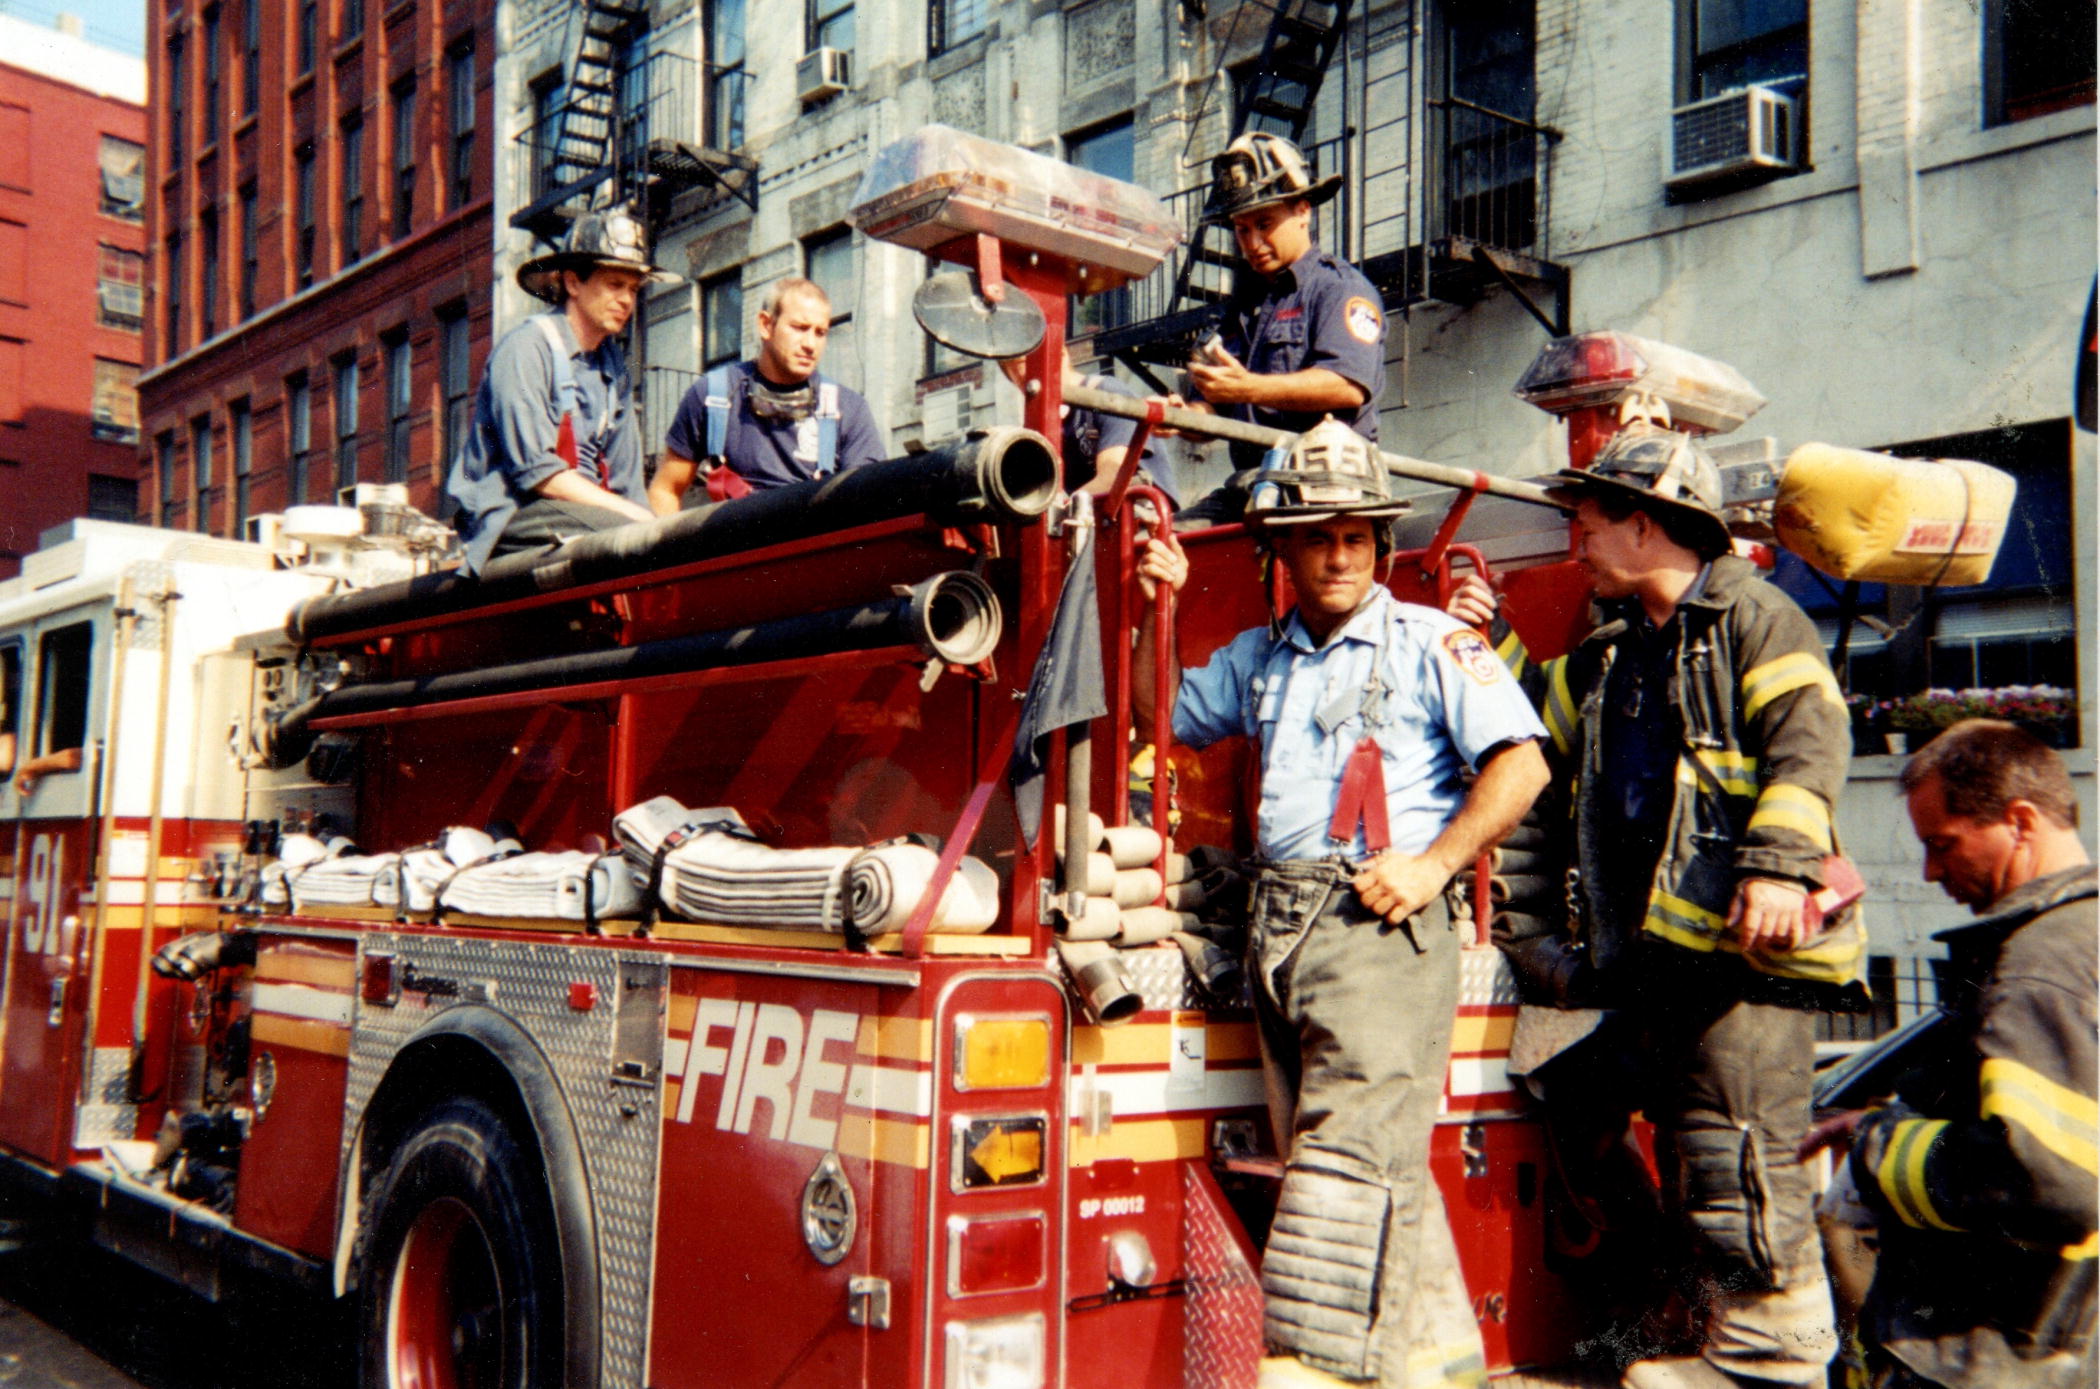 Steve Buscemi (top left) and his firefighting crew return from a call in NYC in late 2001. After 9/11, Buscemi volunteered to help the FDNY and stayed with them for a good while. He never sought notoriety for this and did it rather quietly at the time. He had been a trained and experienced fire fighter before becoming an actor.